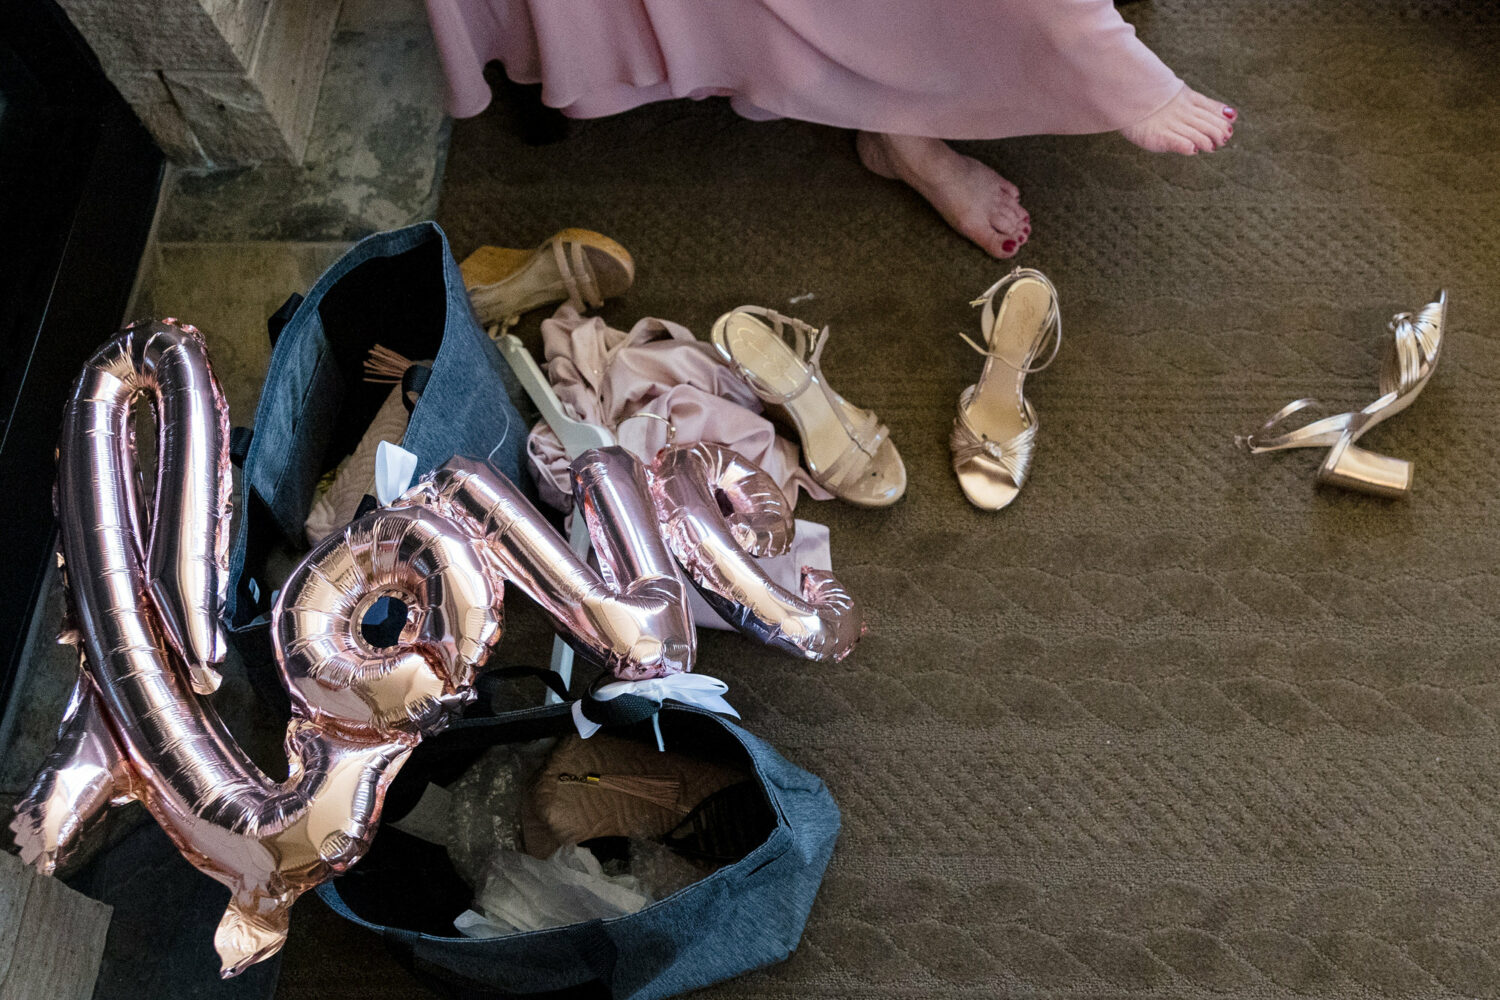 A stressful wedding day scene: tired feet, disorganized bridal party gift bags, and a balloon that spells "LOVE" laying on the floor.